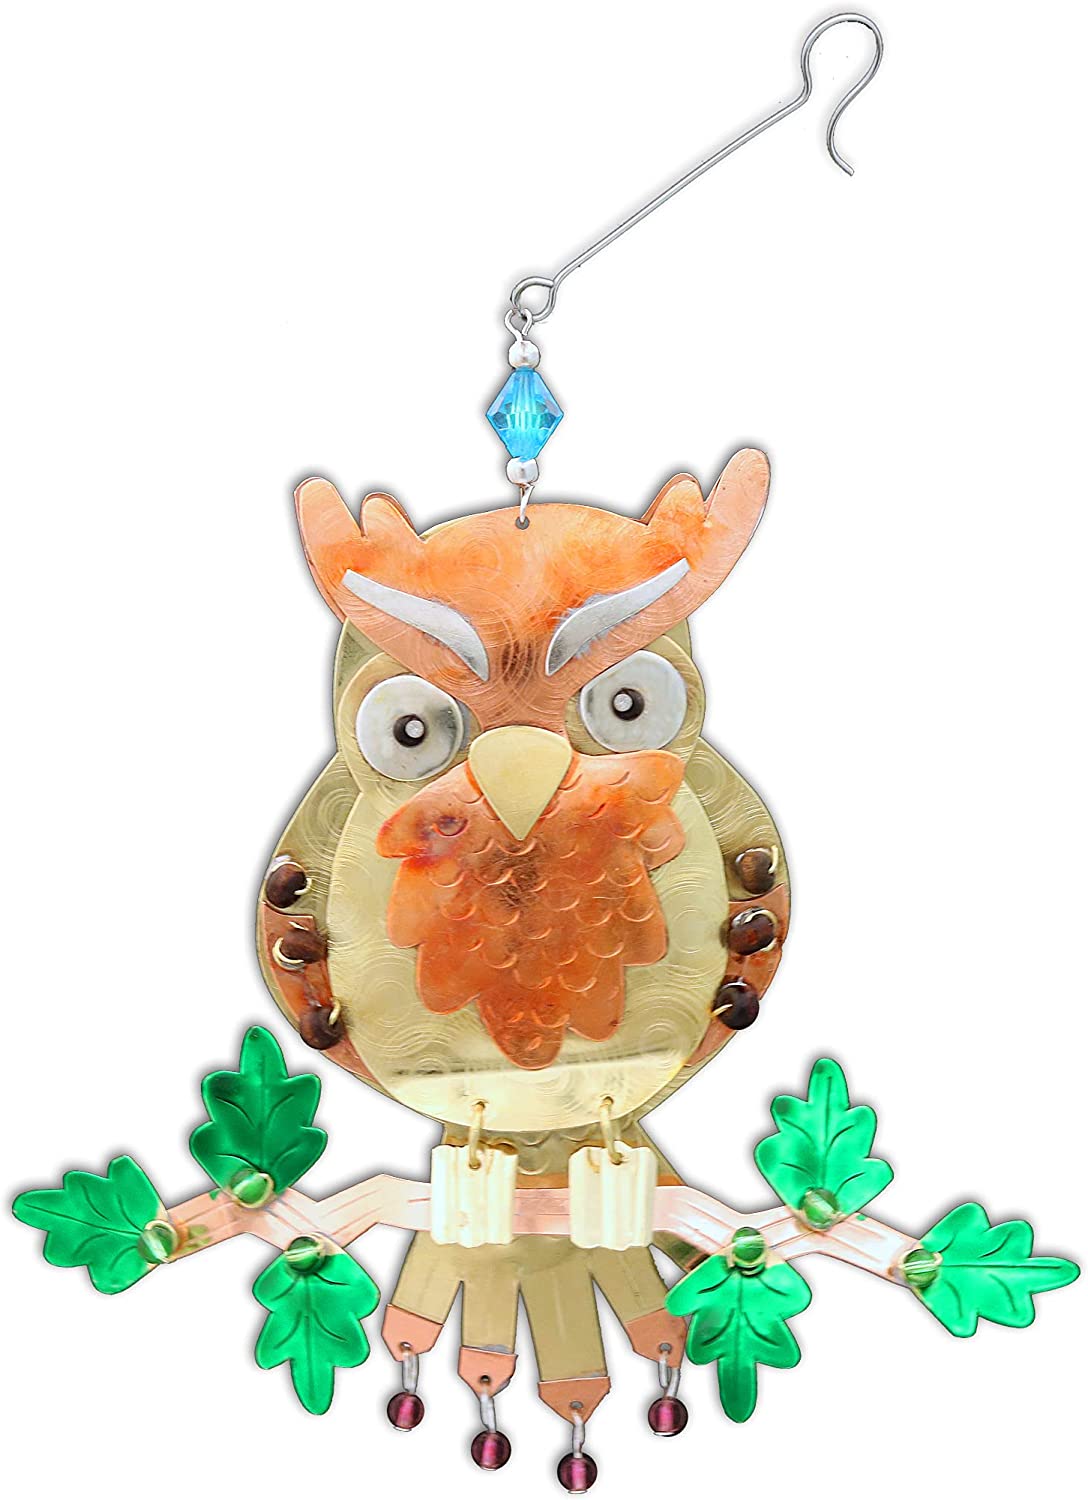 Wise Owl Ornament